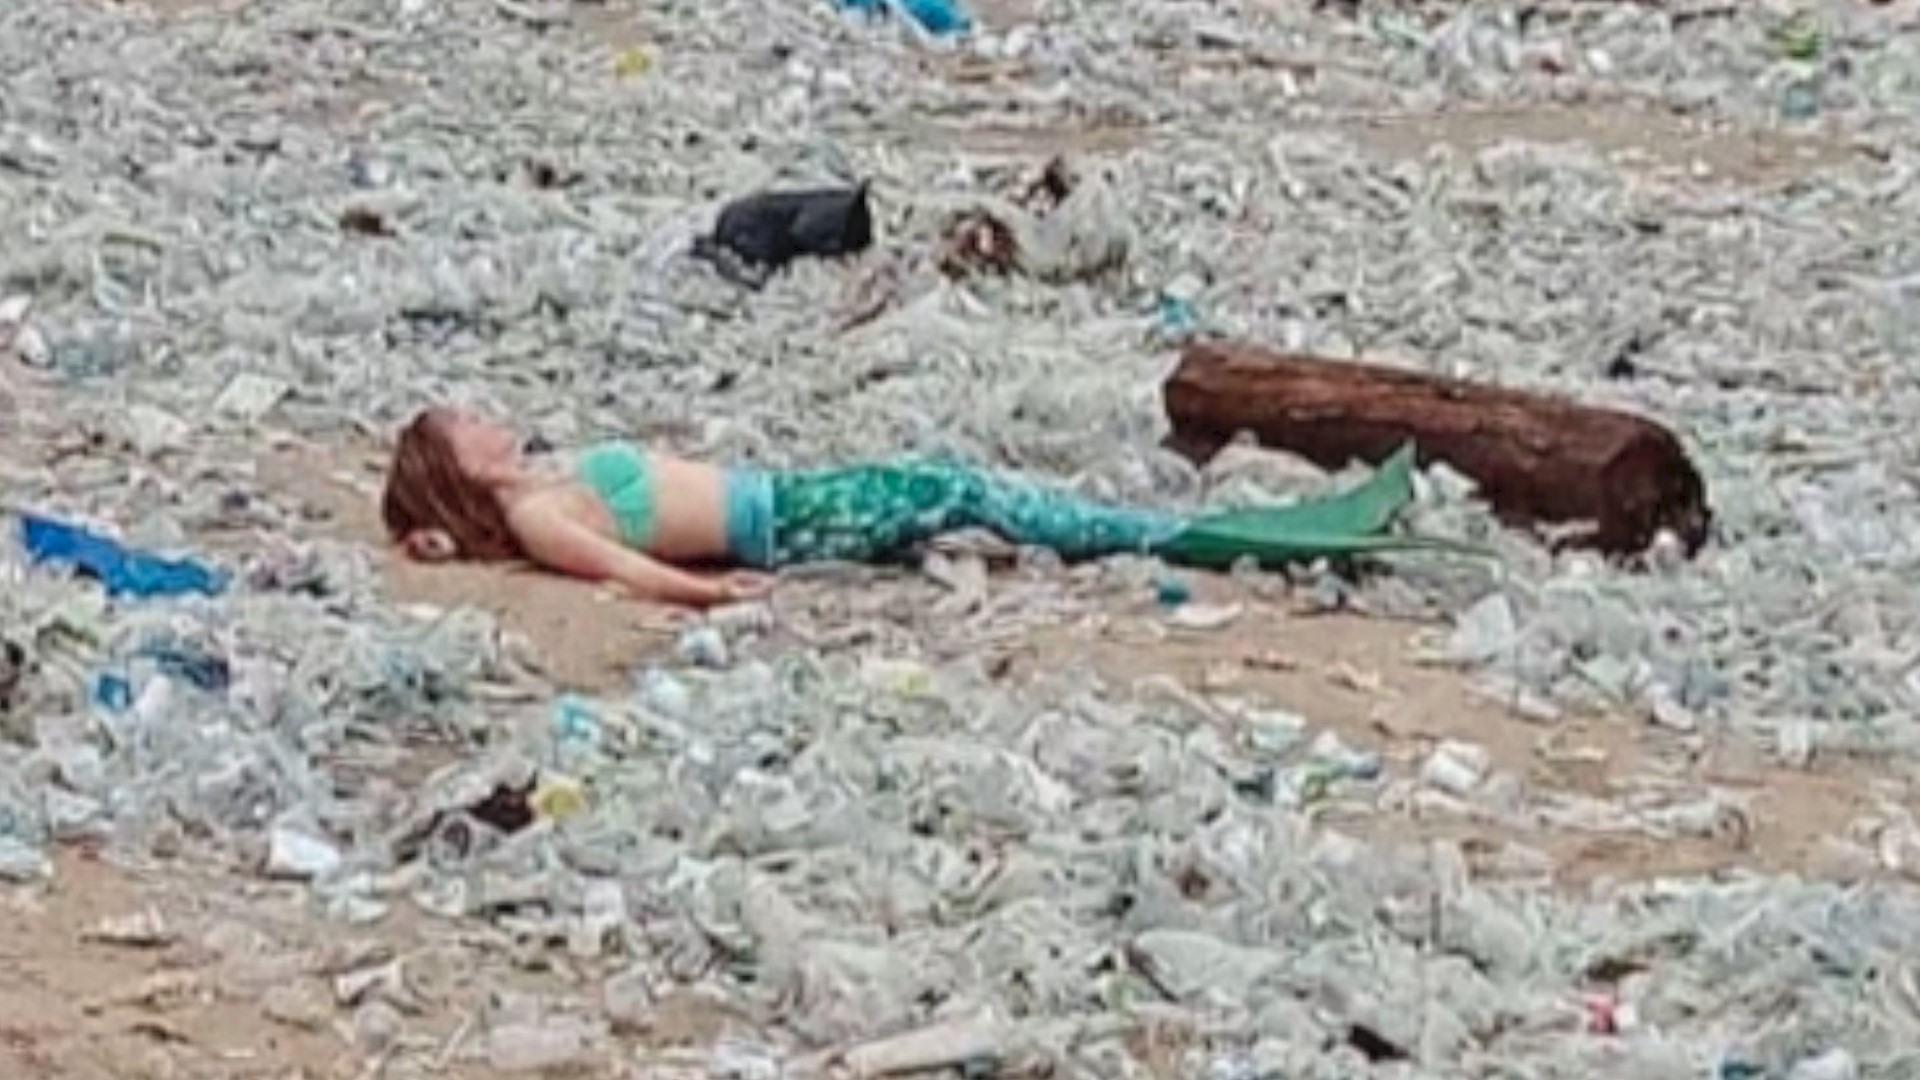 The Litter Mermaid! Costumed Mermaid Pictured Laying On Indonesian Beach Amongst Piles Of Trash! | Khou.com